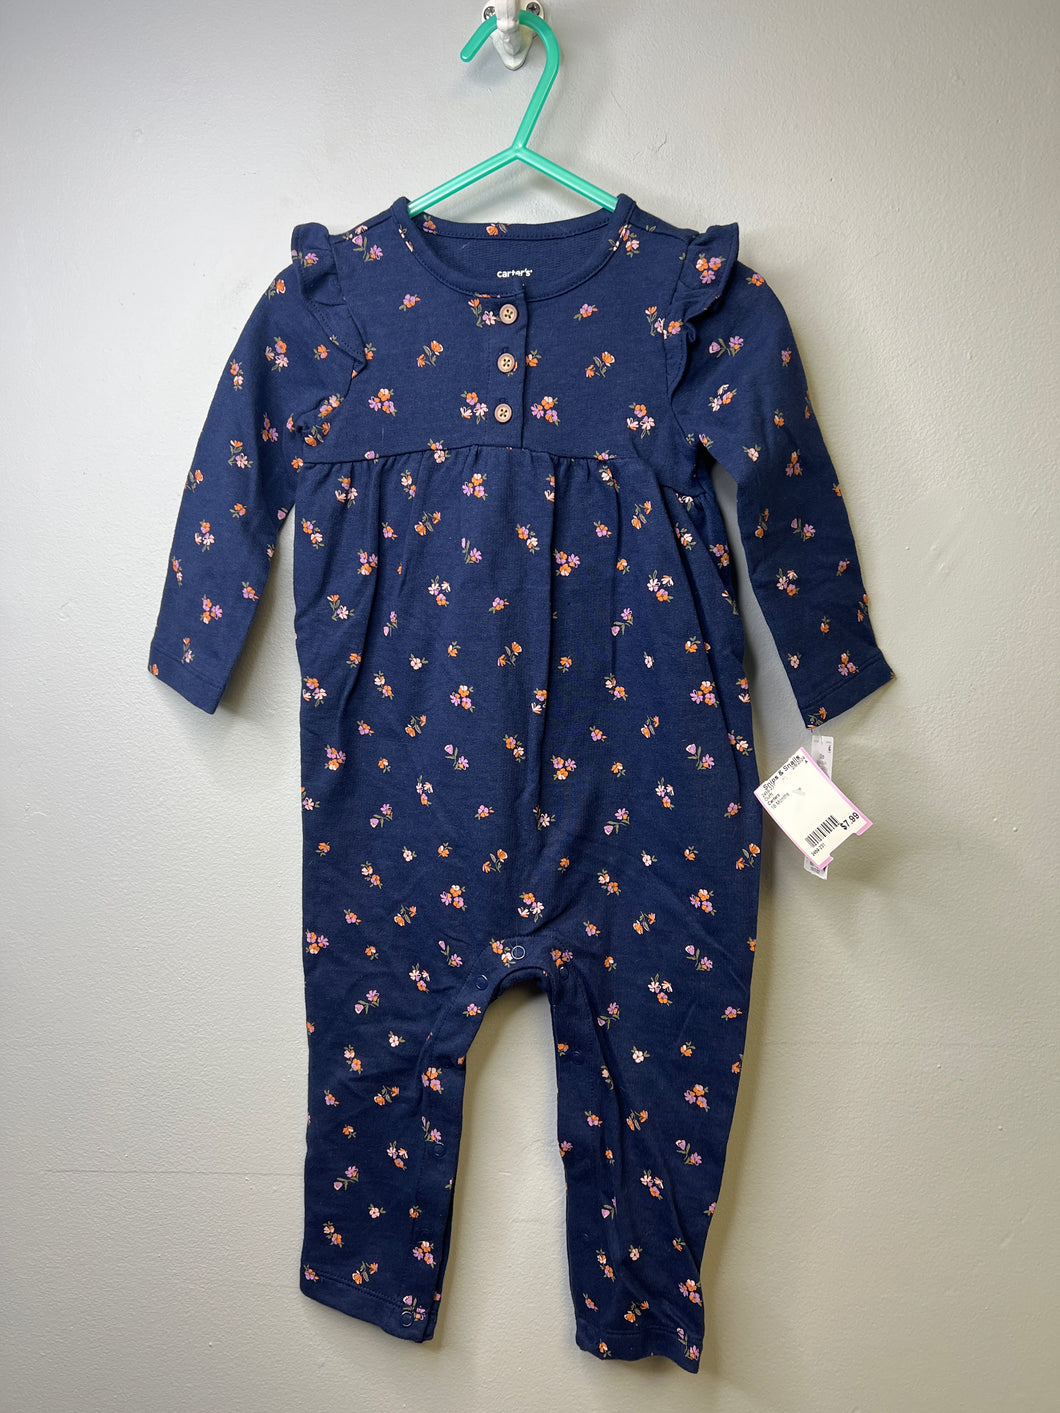 Girls 18 Months Carters Outfit BNWT